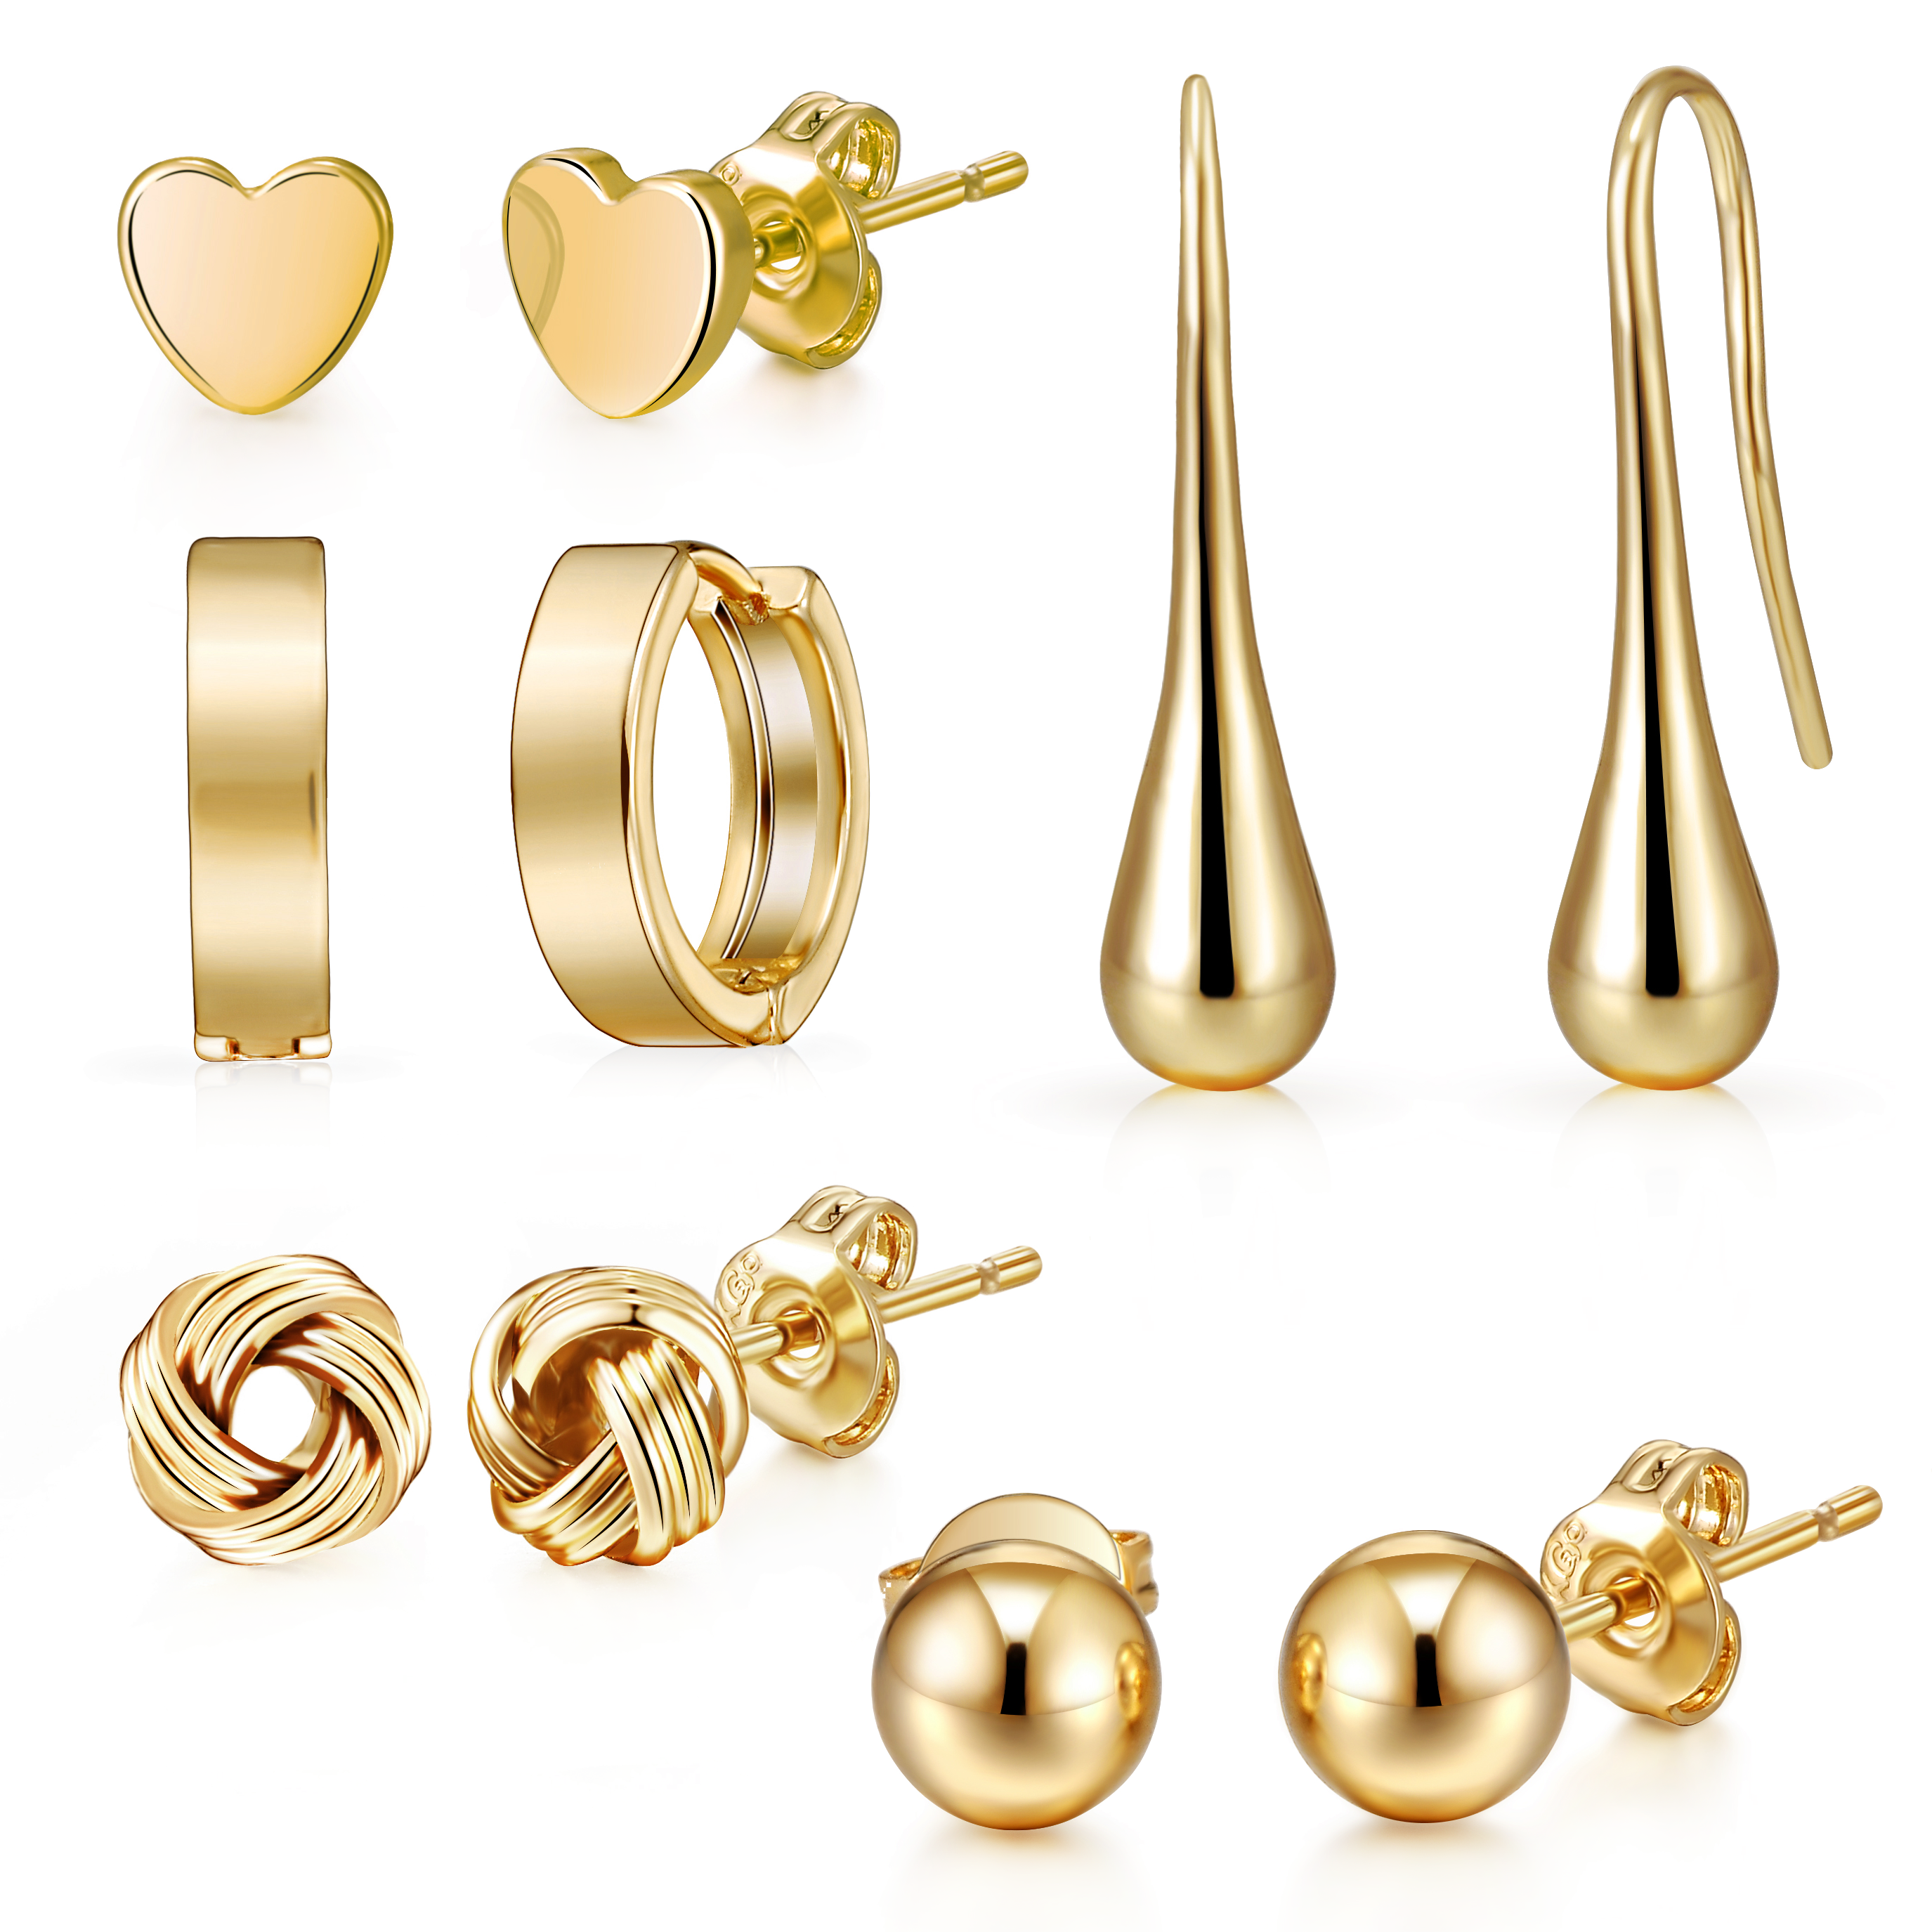 5 Pairs of Gold Plated Earrings by Philip Jones Jewellery